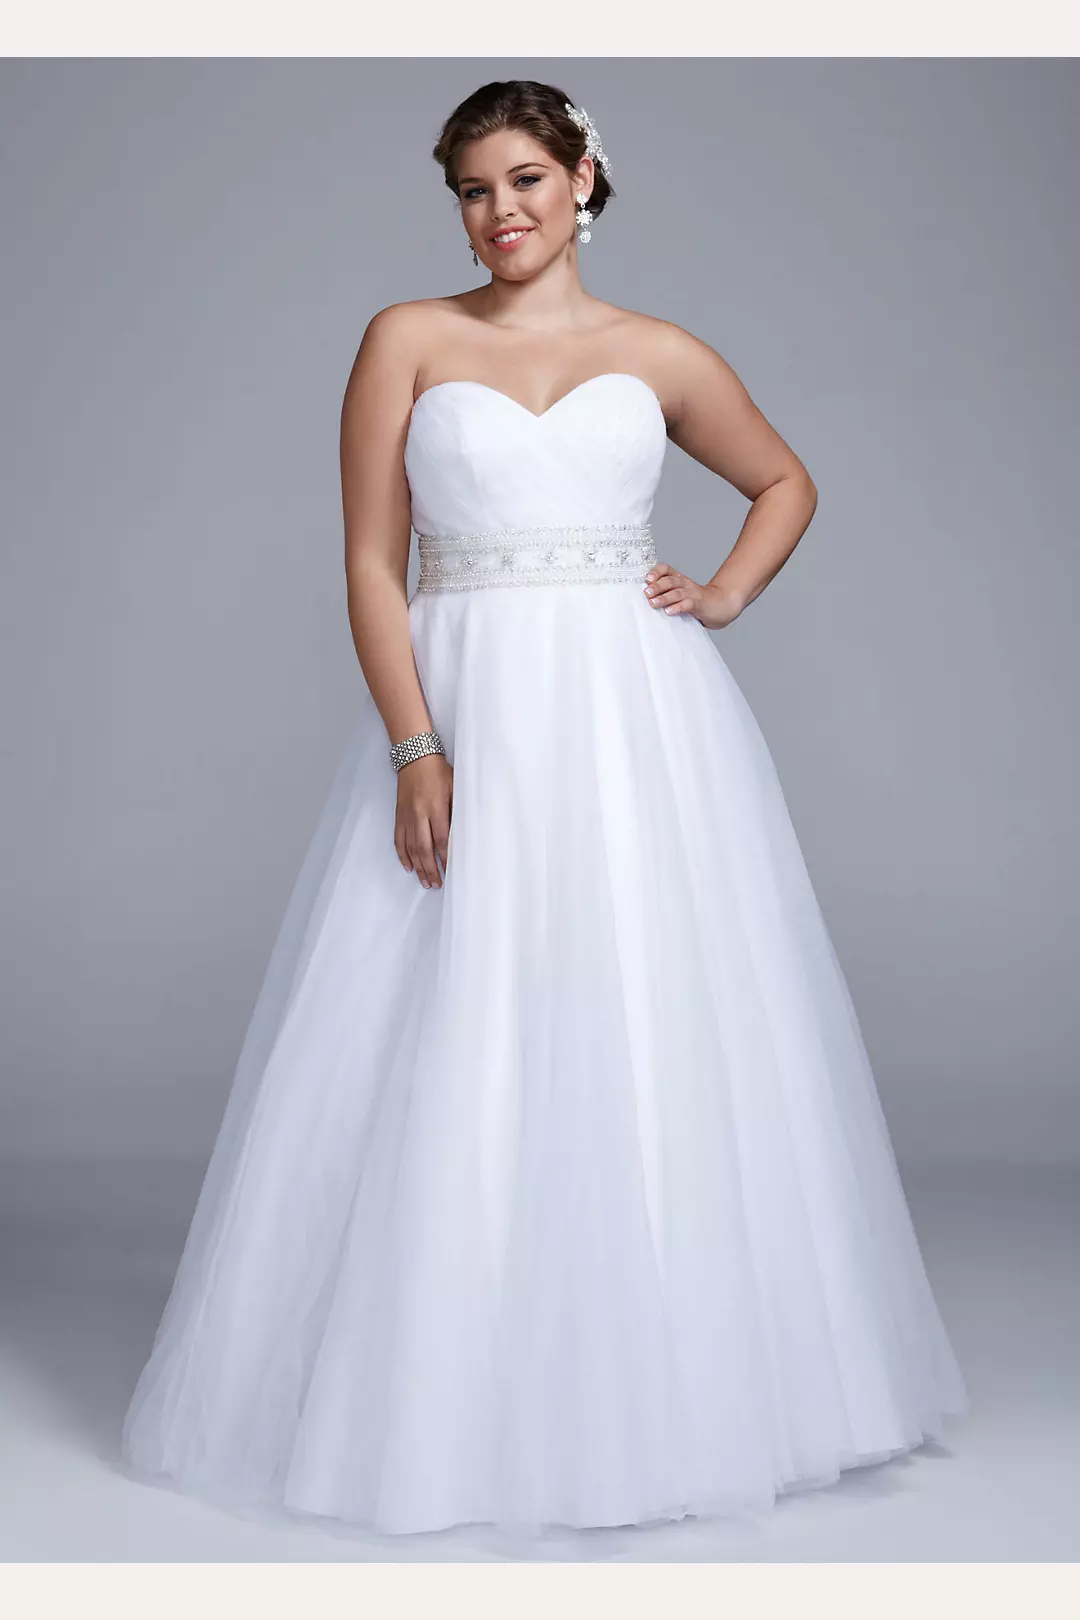 Extra Length Strapless Ball Gown with Beaded Belt Image